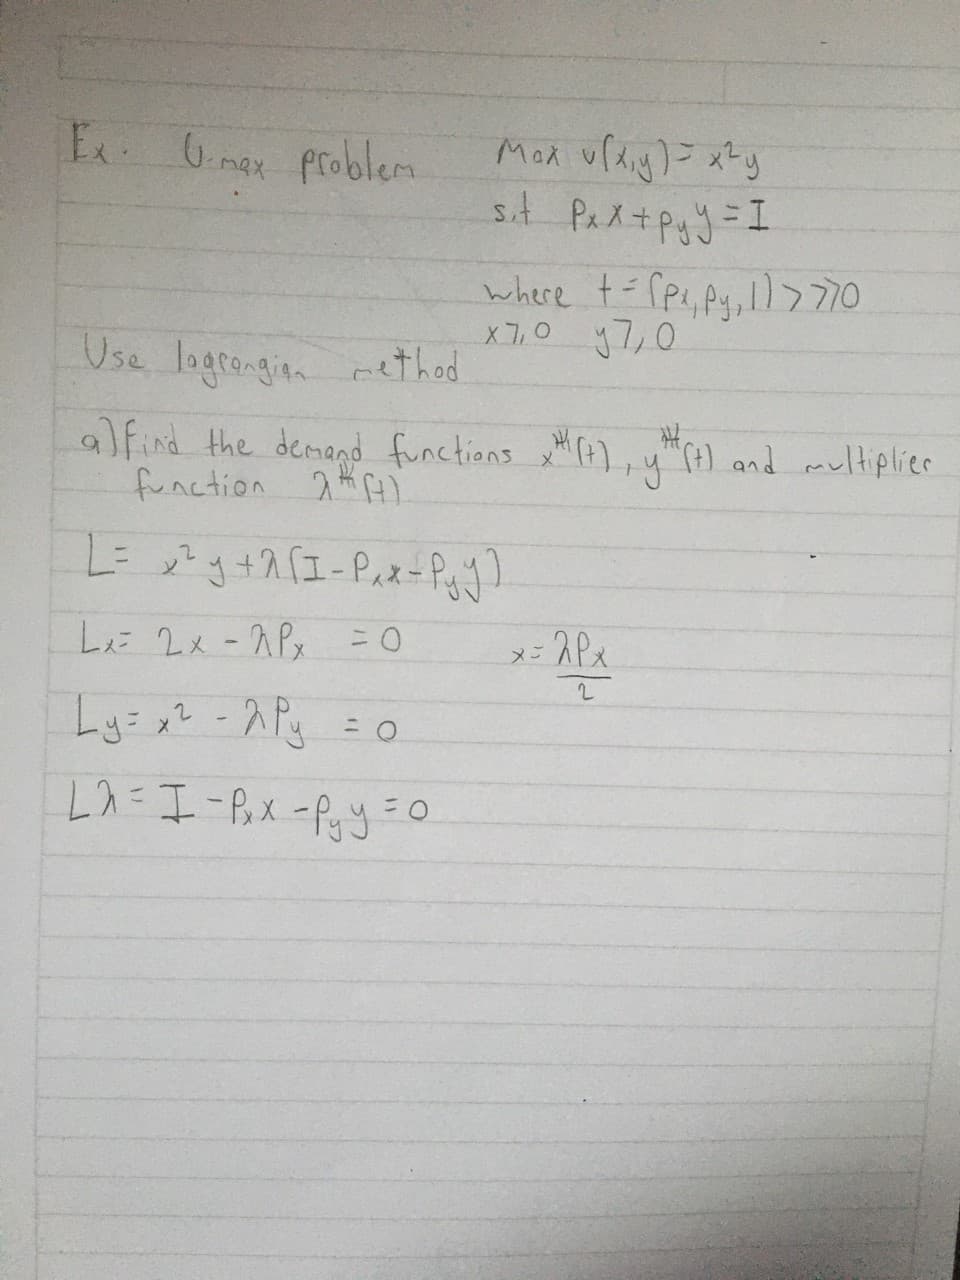 E Gmax problem
Mad v「Ay)メy
where t= rpe, pg, I) > 770
X7,0 y7,0
Use logtengian rethed
a) find the demand functions x),y") and multiplier
function f).
Lに 2x-スPs 30
メニ2Pス
Ly= x? -2Pg = 0
